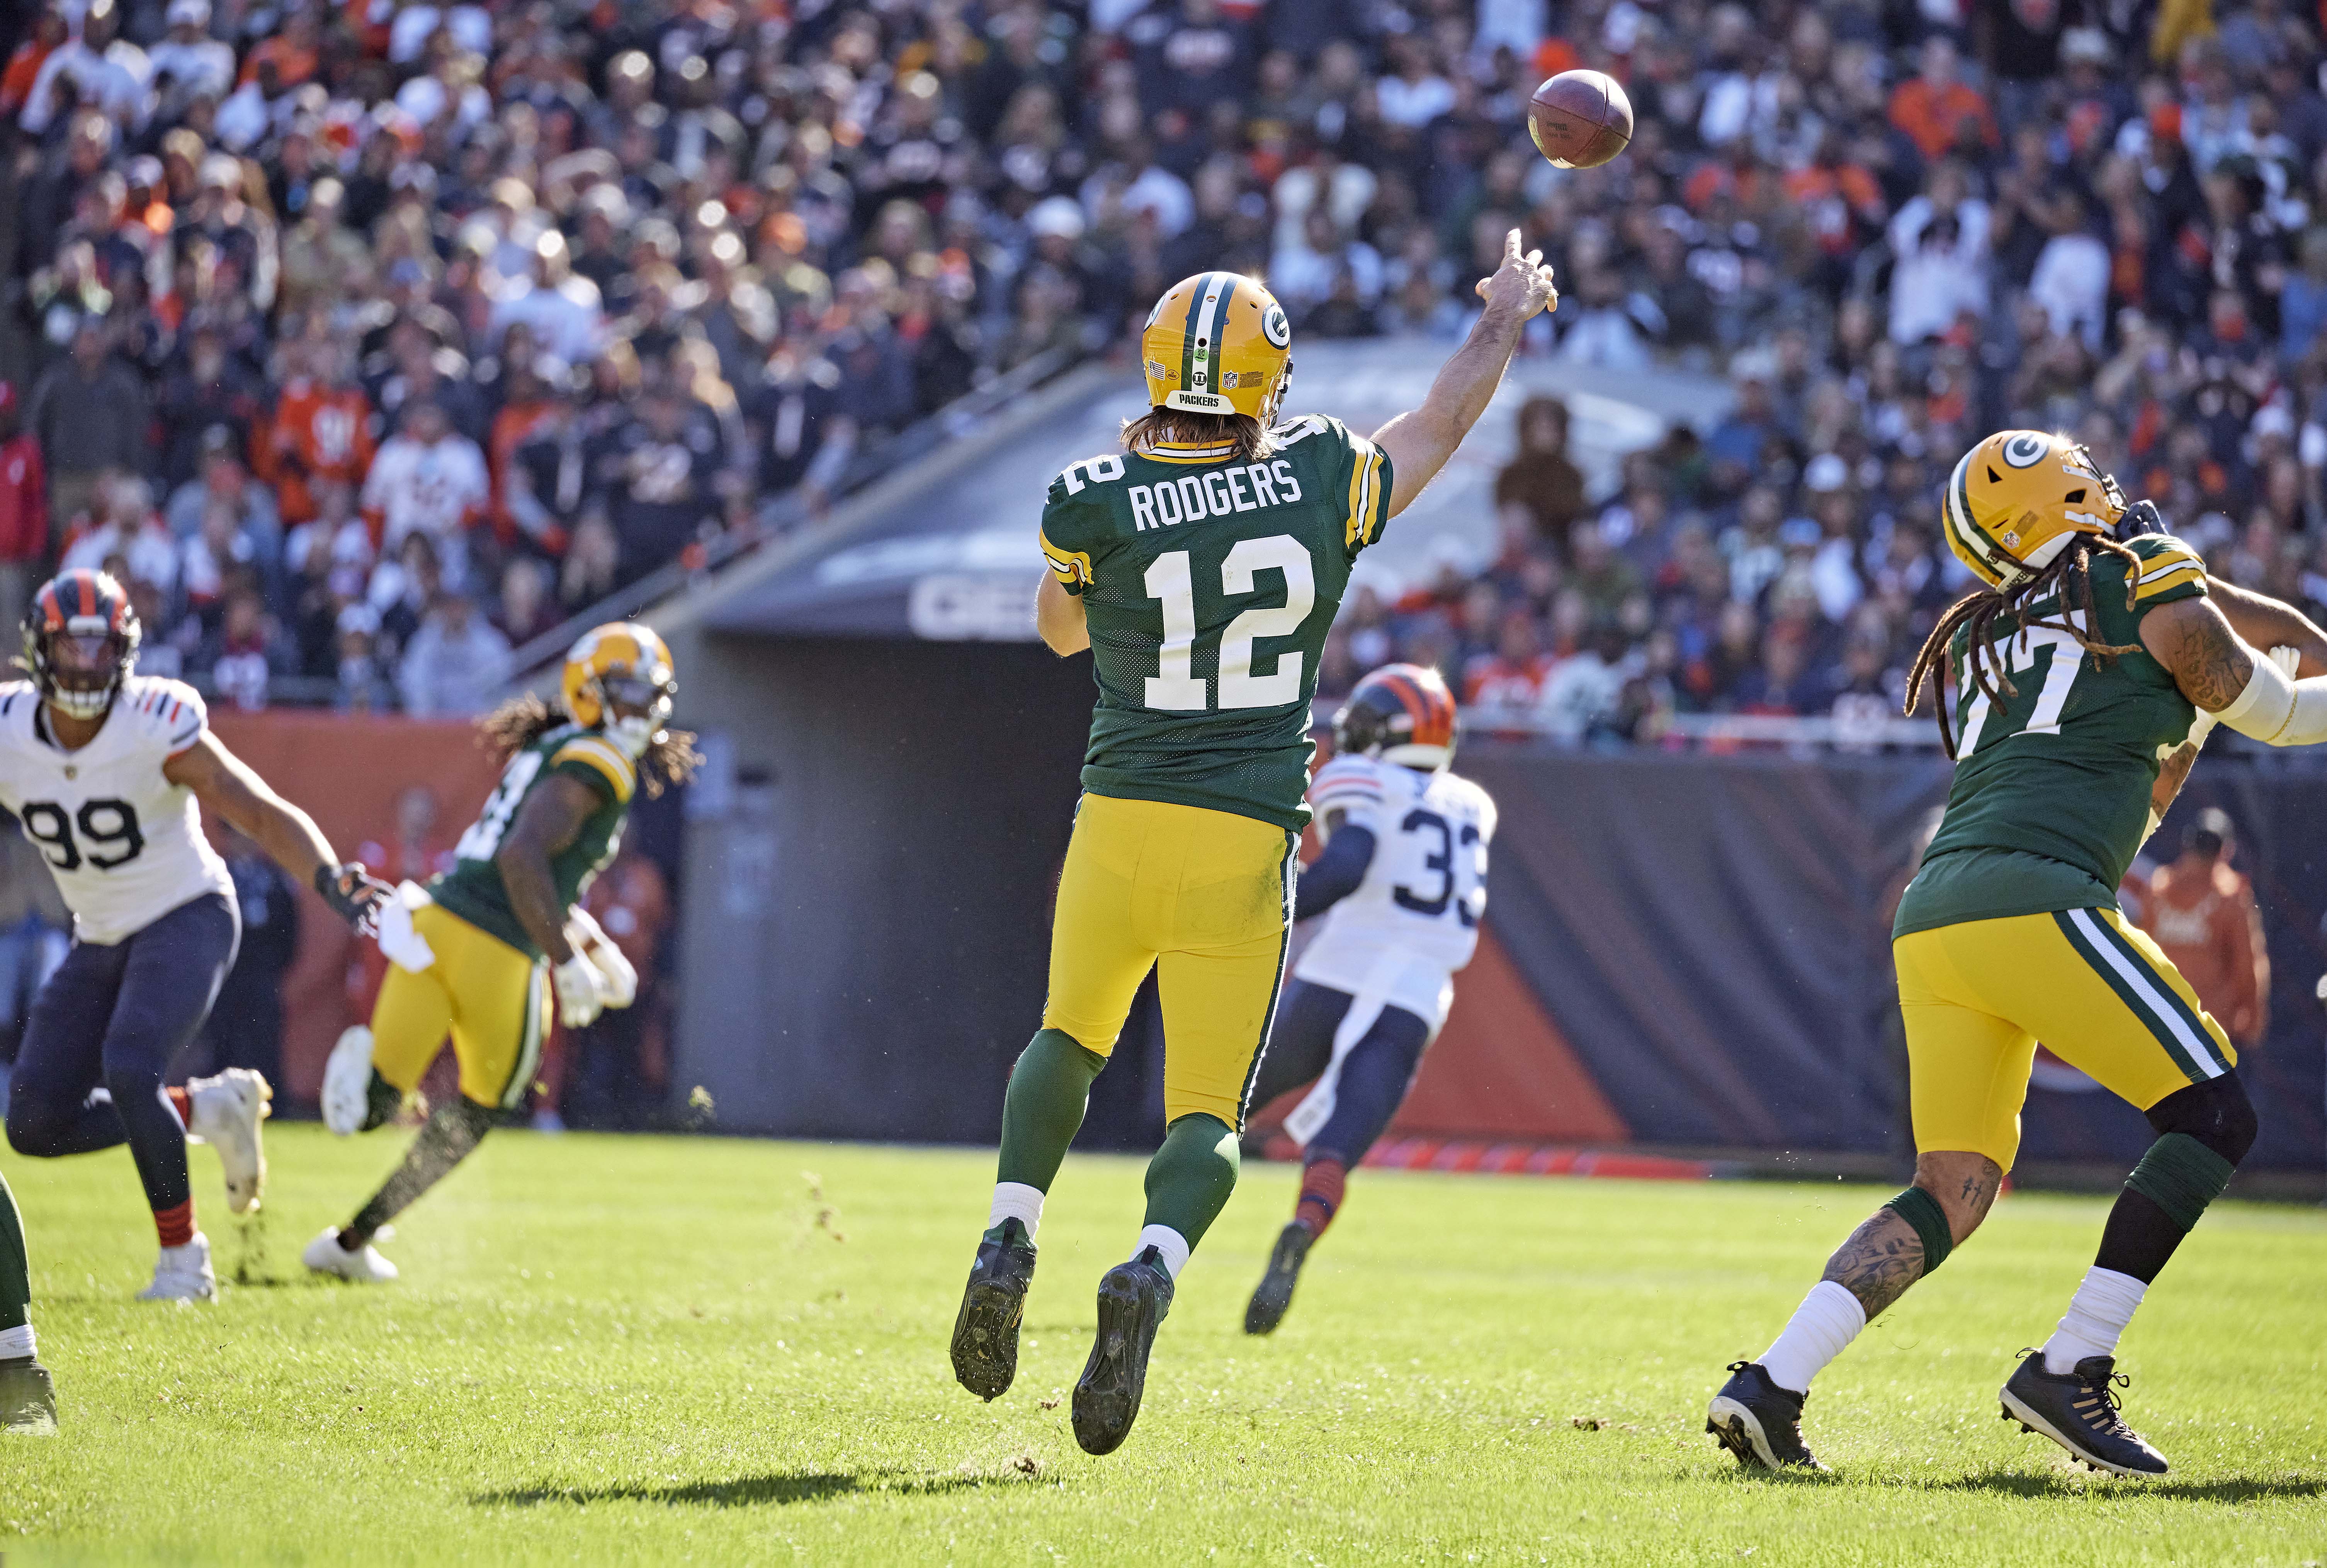 Aaron Rodgers throws downfield while both feet are off the ground during a game against the Bears